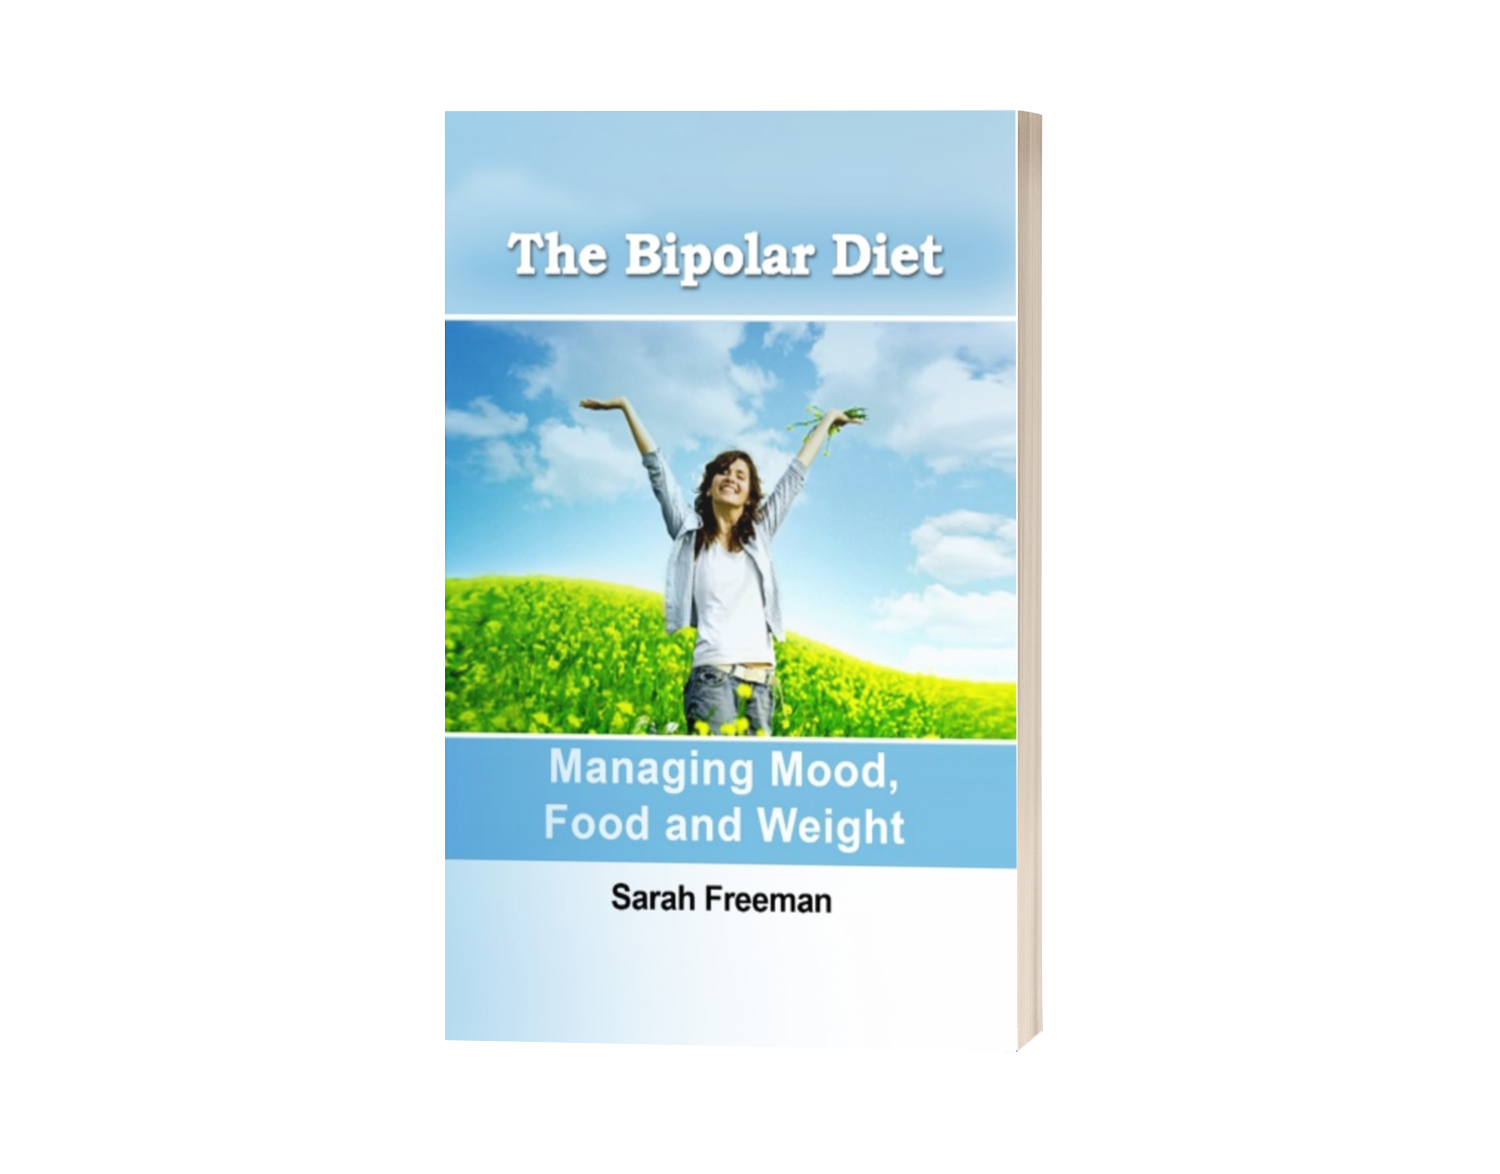 The Bipolar Diet: Managing Mood, Food and Weight